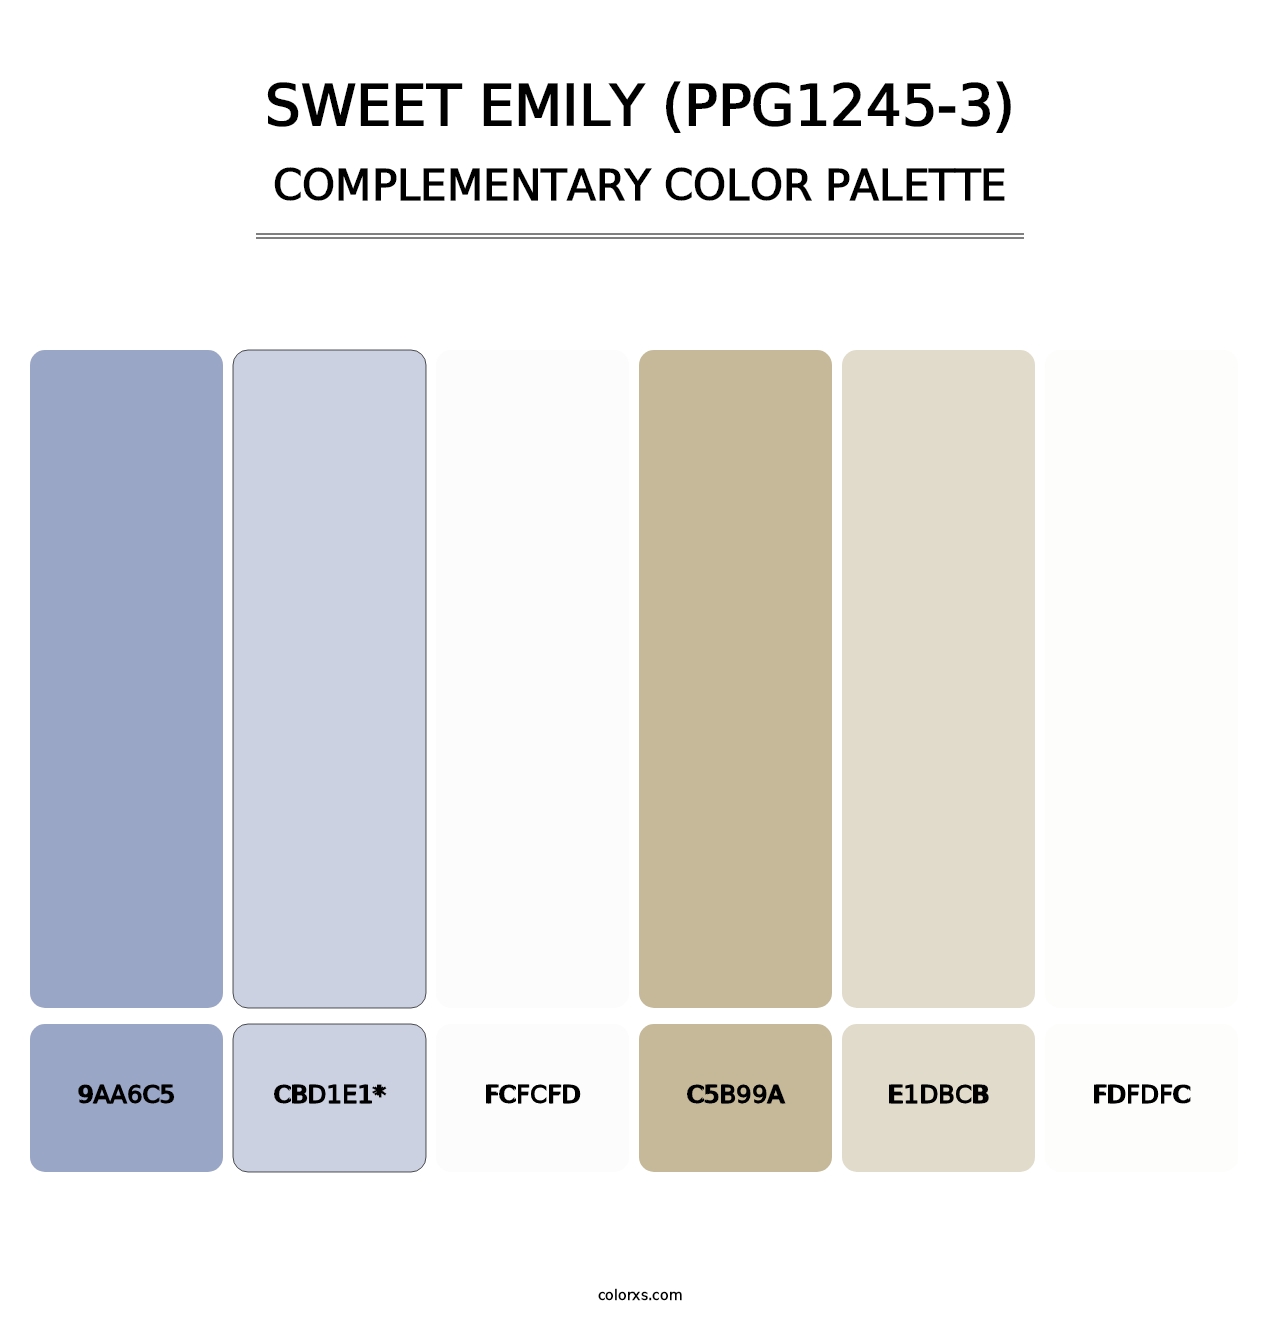 Sweet Emily (PPG1245-3) - Complementary Color Palette